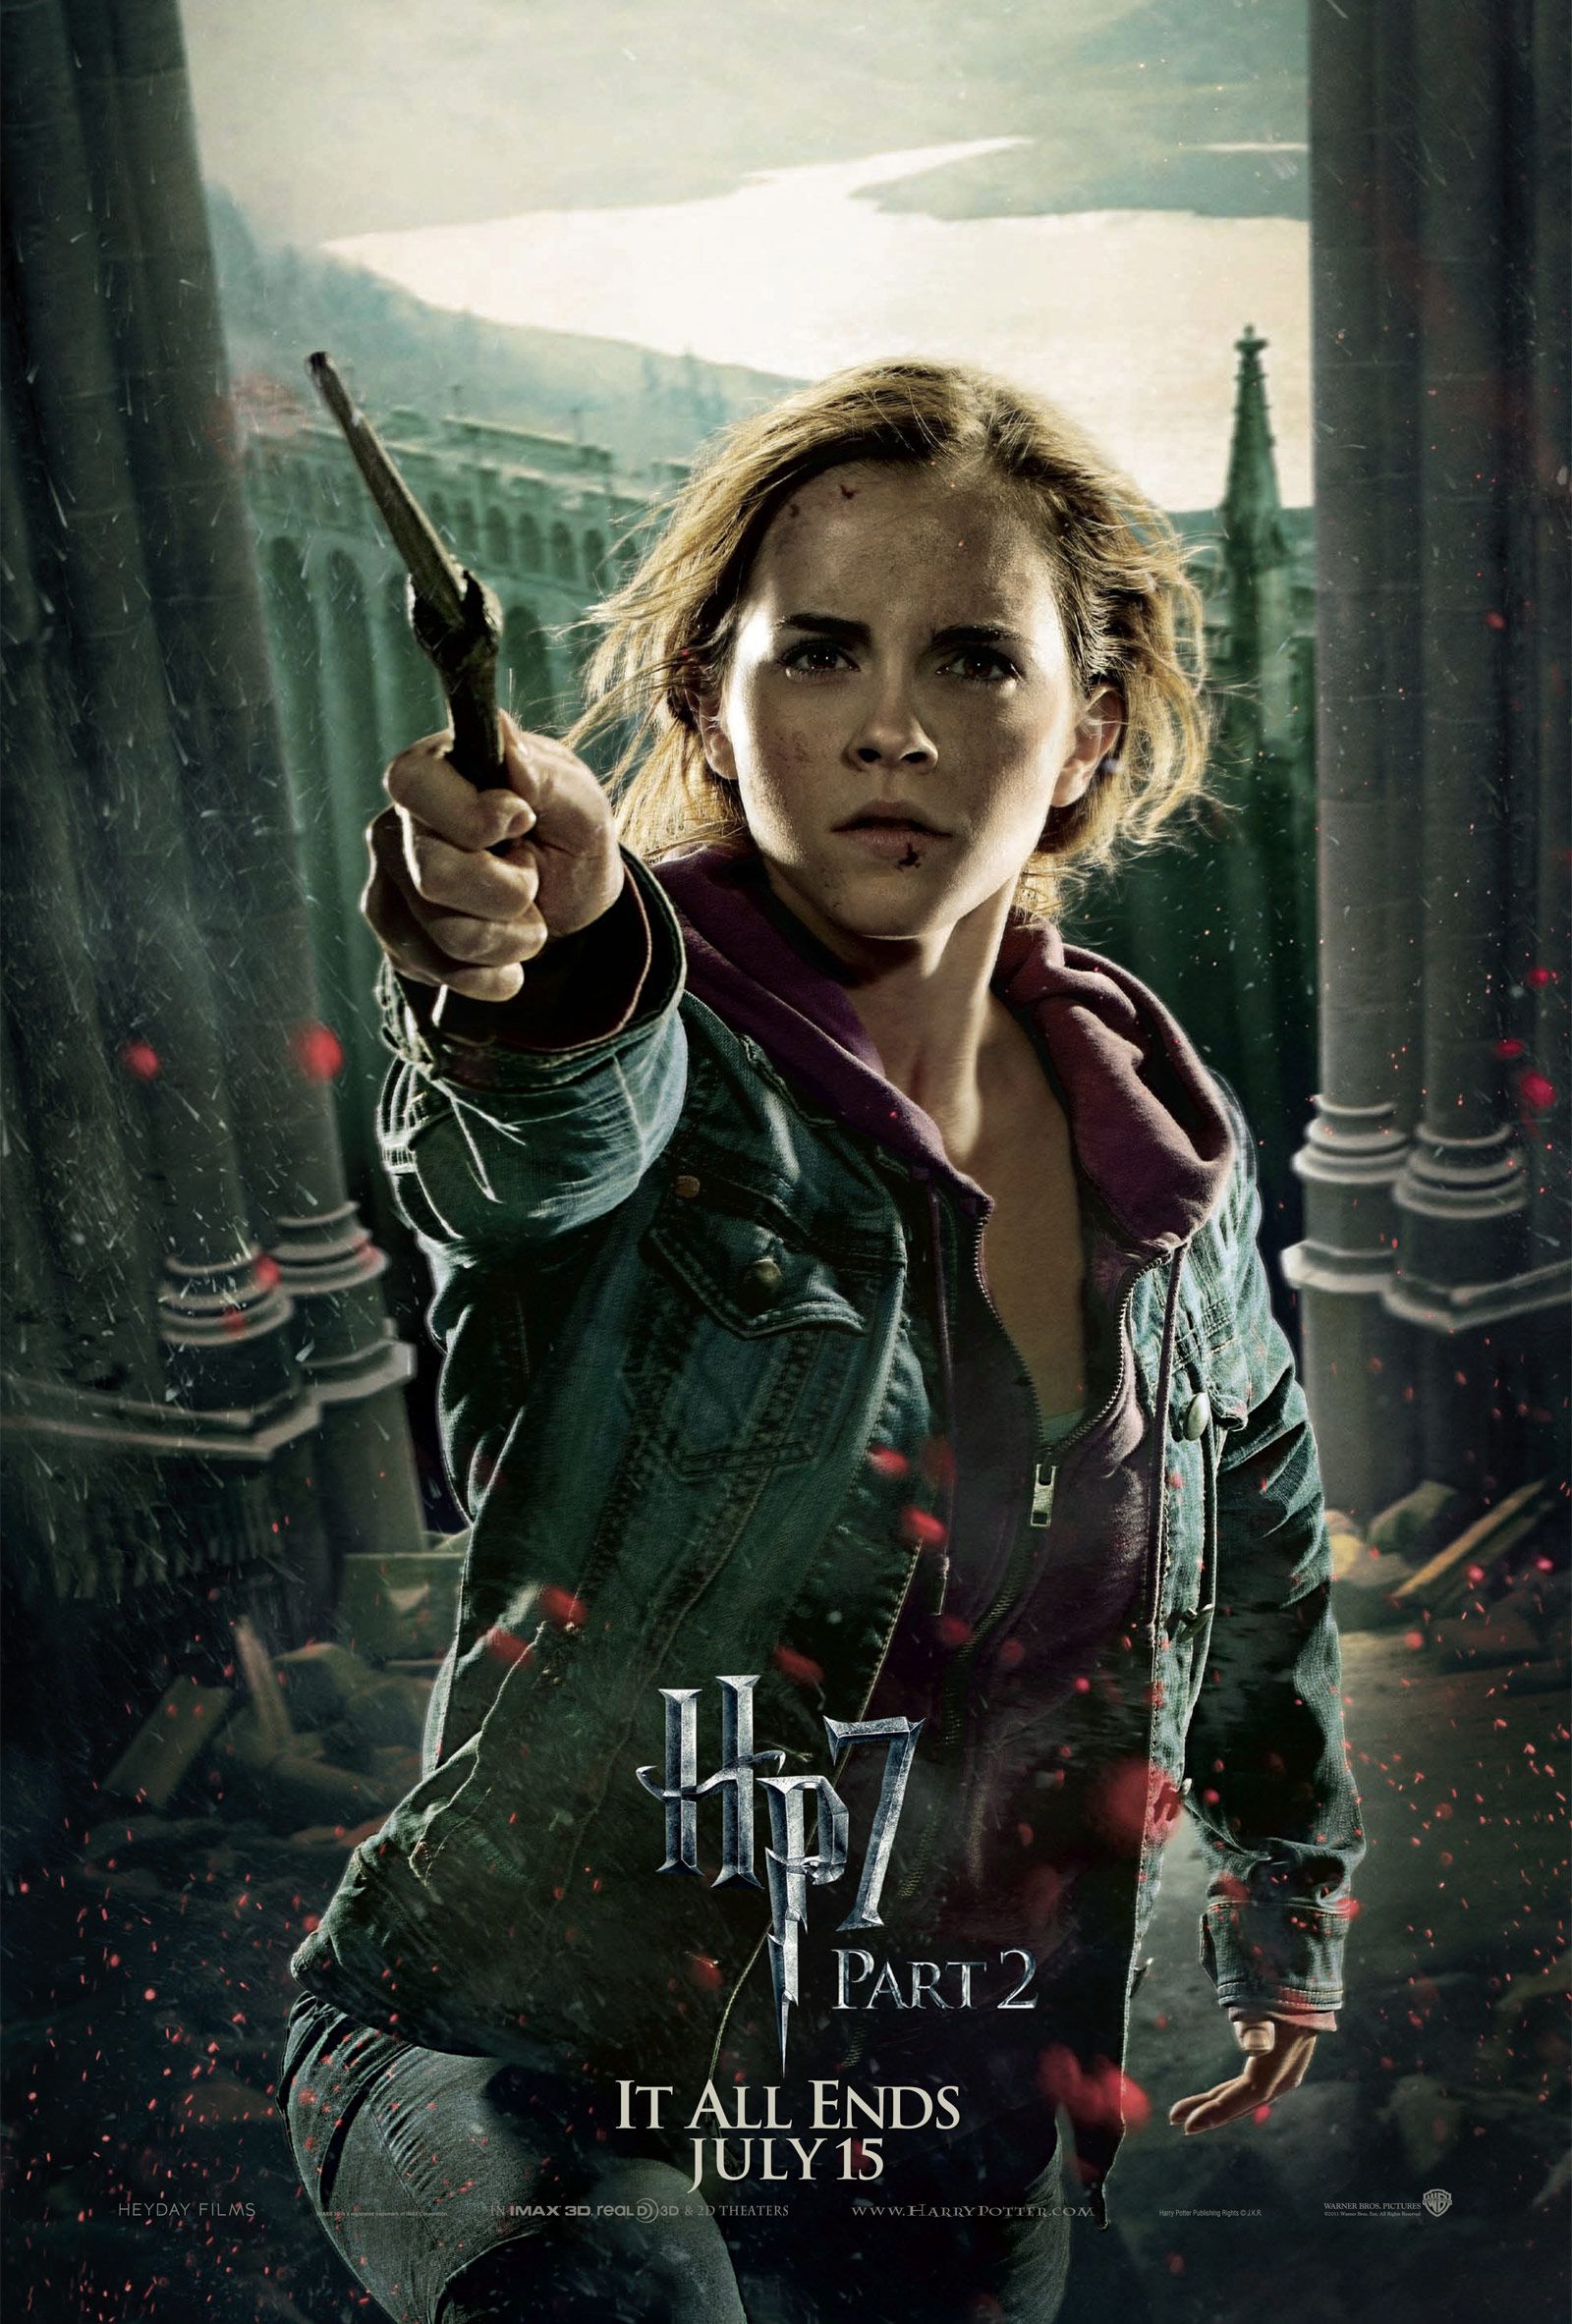 Harry Potter and the Deathly Hallows - Part 2 Hermione Granger Character Poster